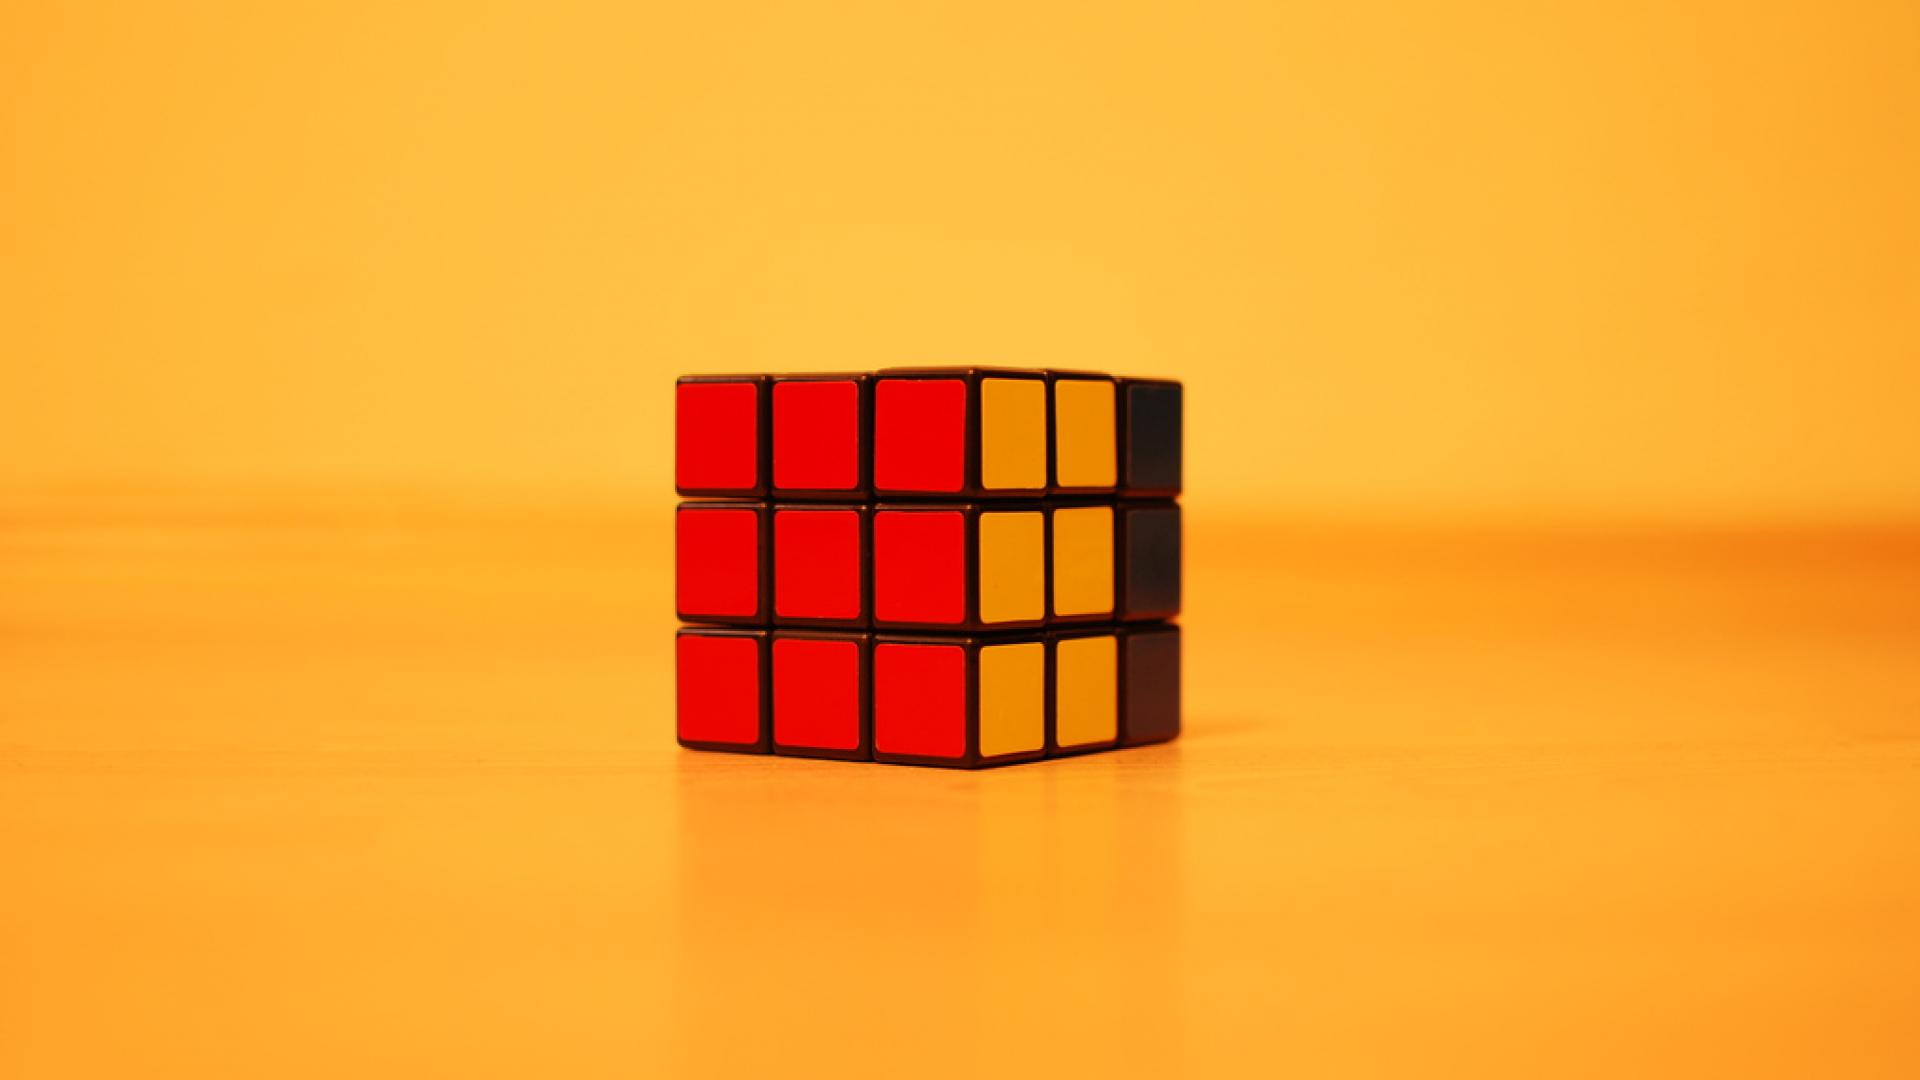 Image of rubik's cube against a yellow background